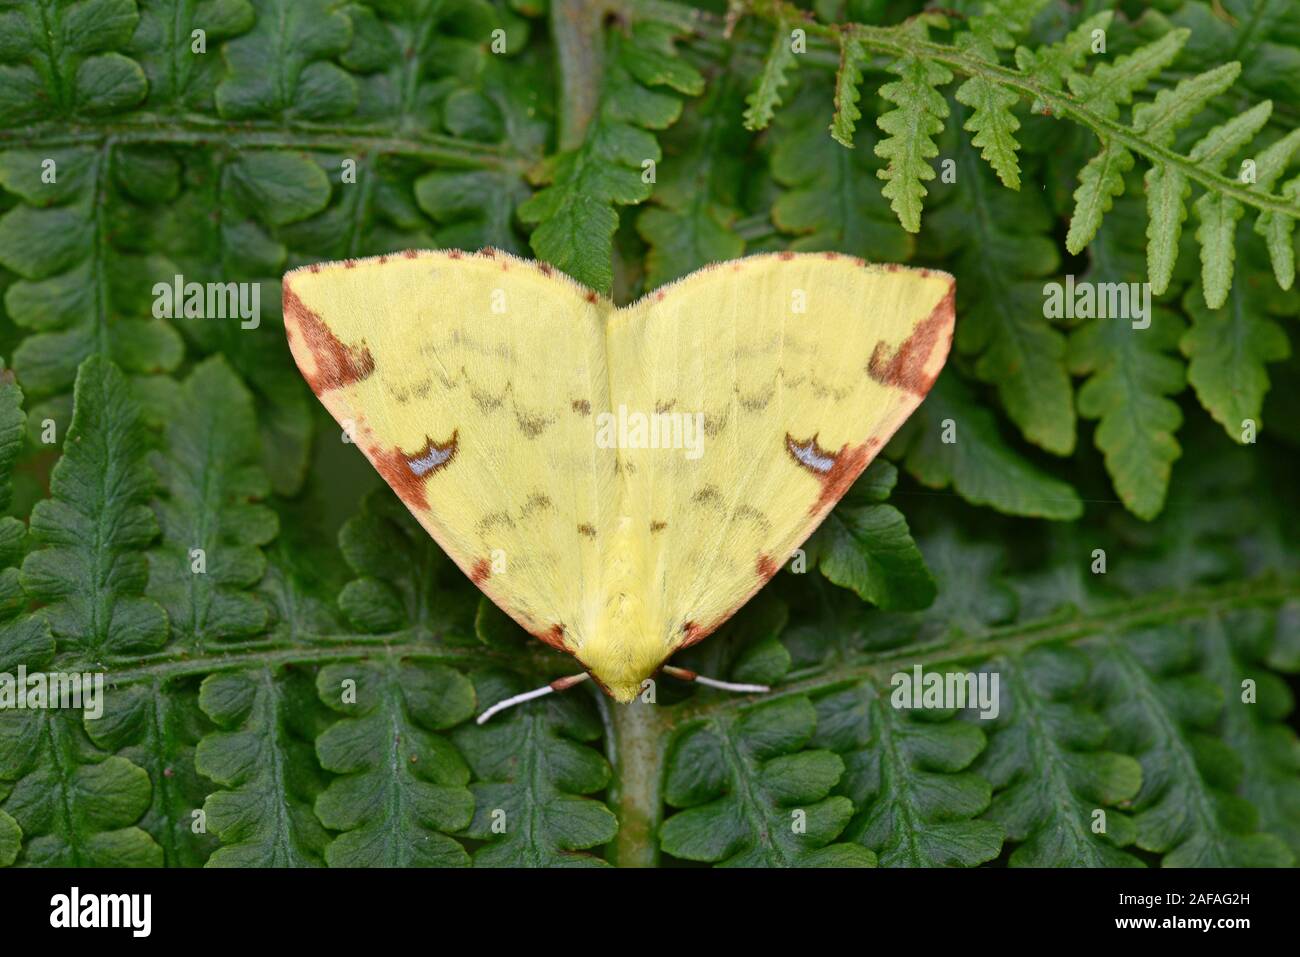 Brimstone Moth (Opisthograptis luteolata) resting on fern leaf, wales, August Stock Photo